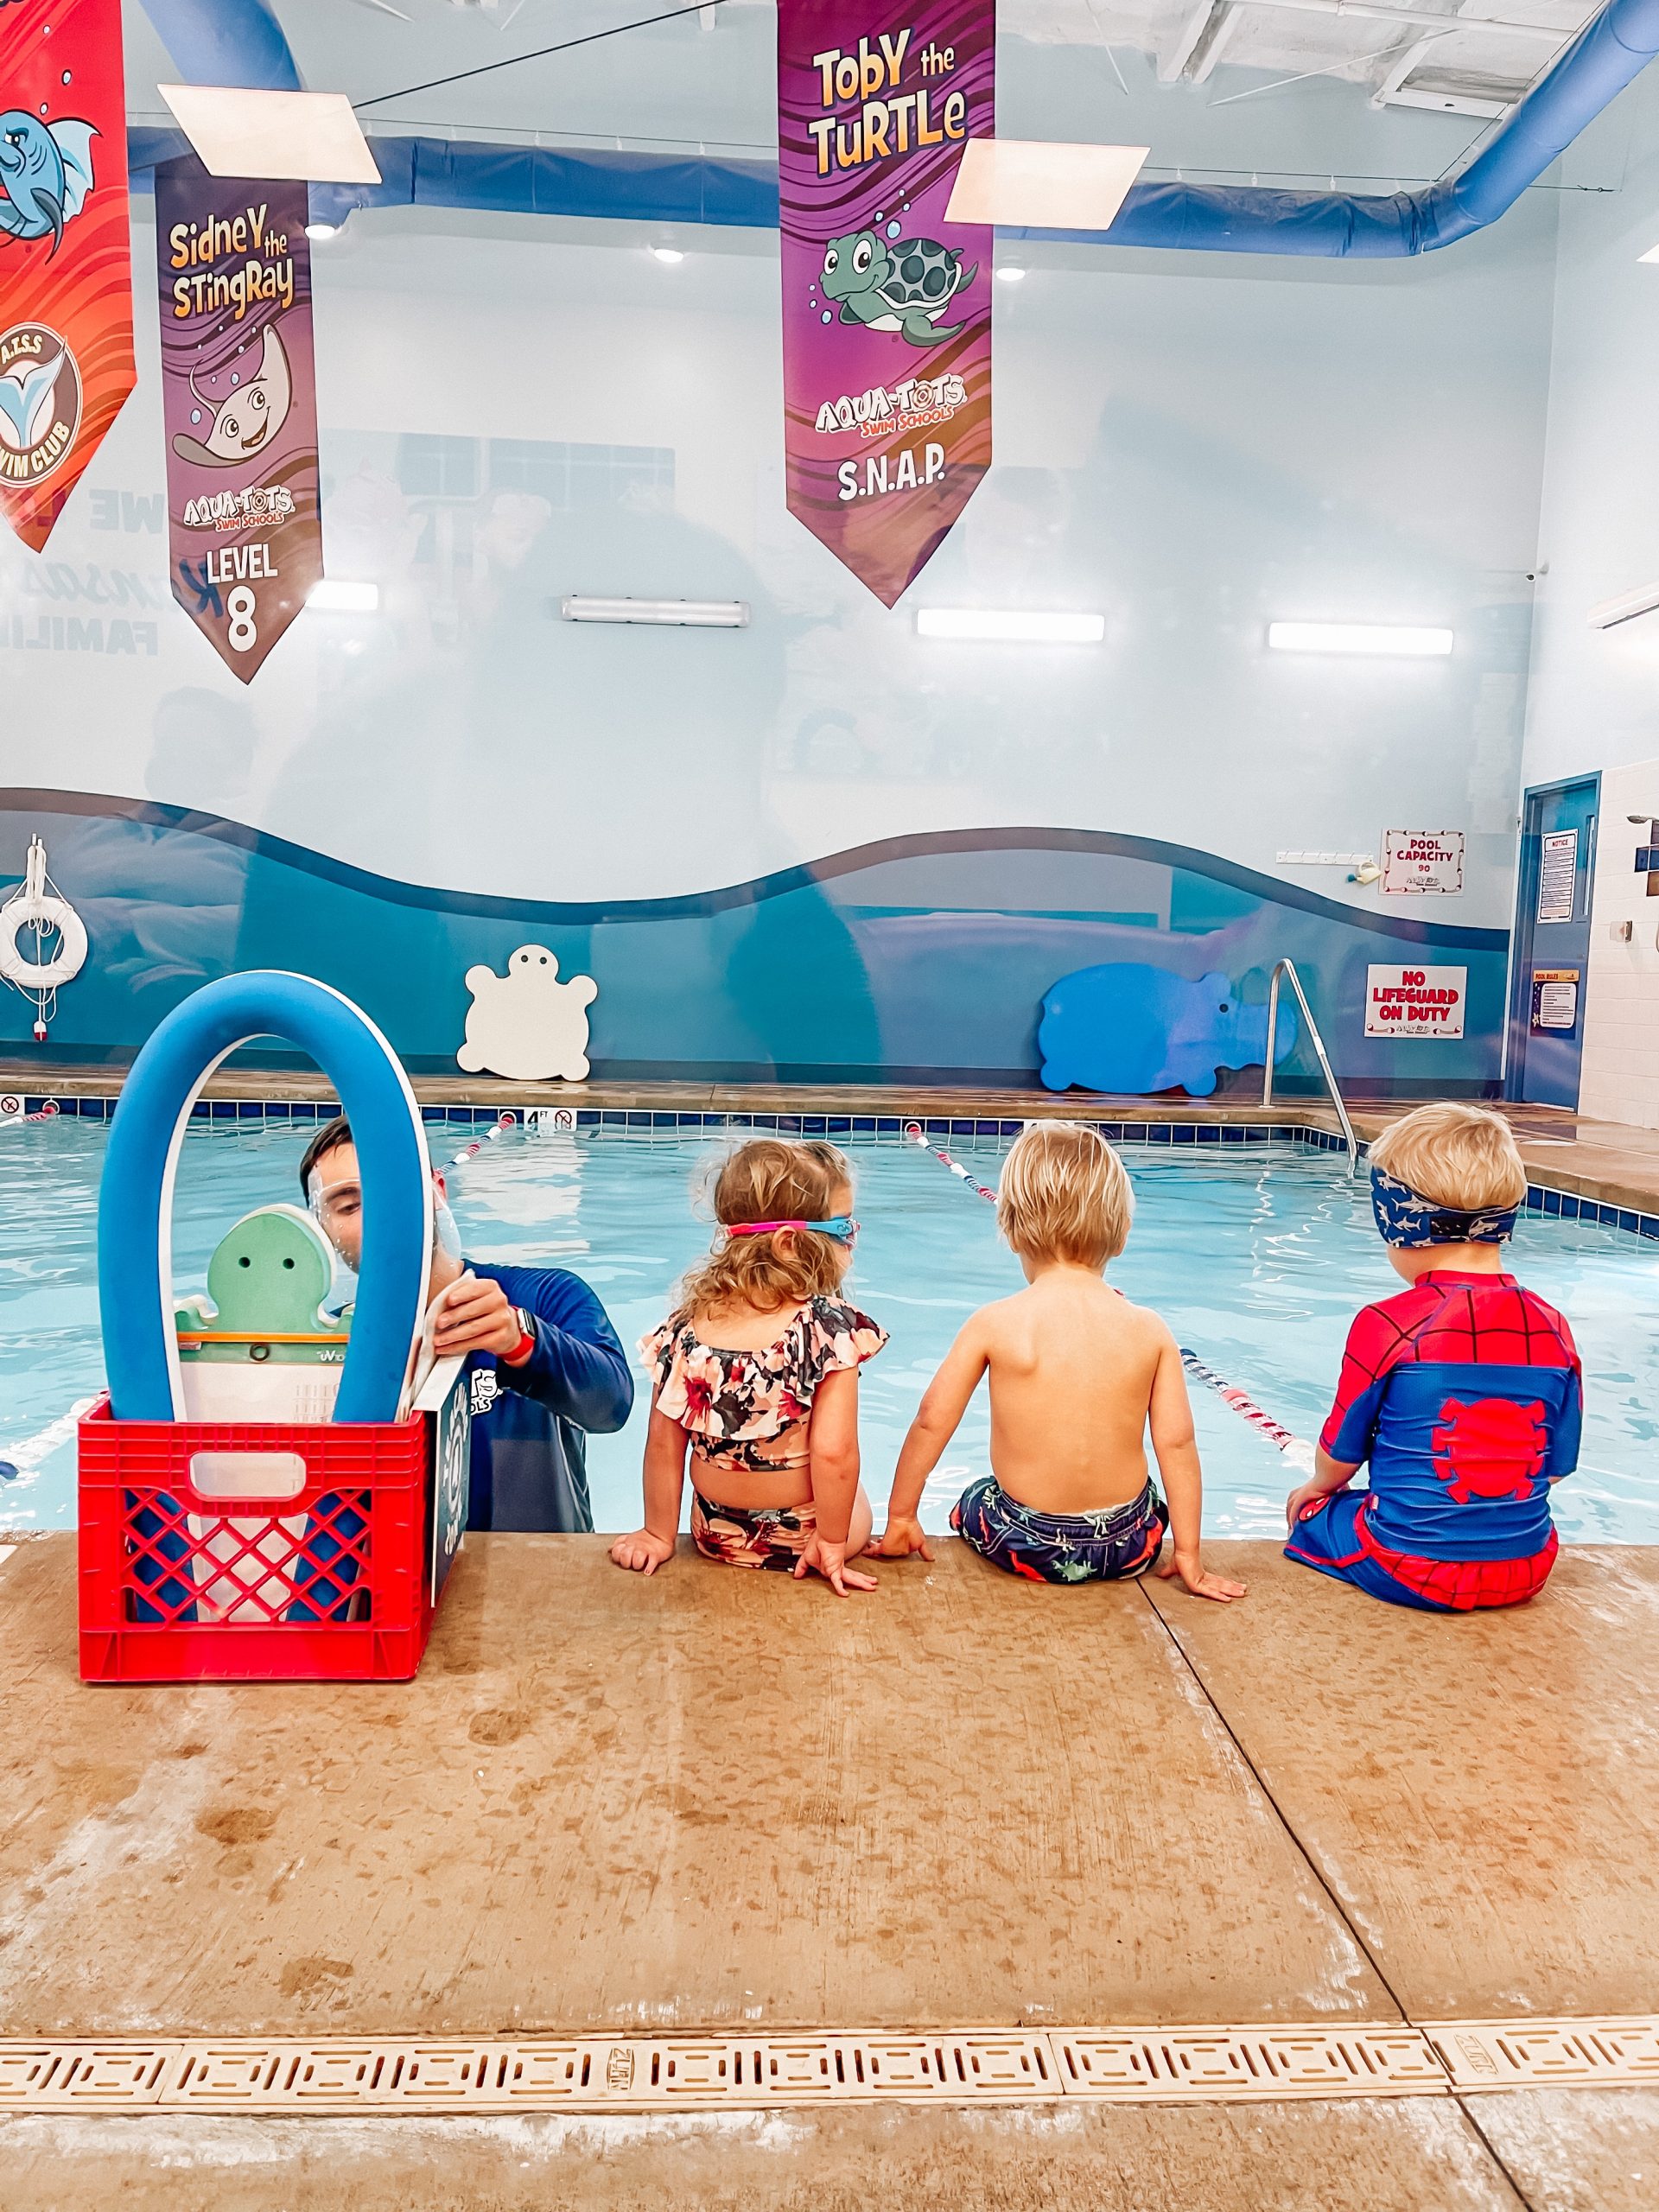 5 Ways to Practice Swimming Without a Pool - Keep your little swimmer's skills strong without a pool with these 5 ways to practice swimming without a pool. Great for helping your kids practice in between swim lessons! #swimlessons #swimming #swim #kidsswimming